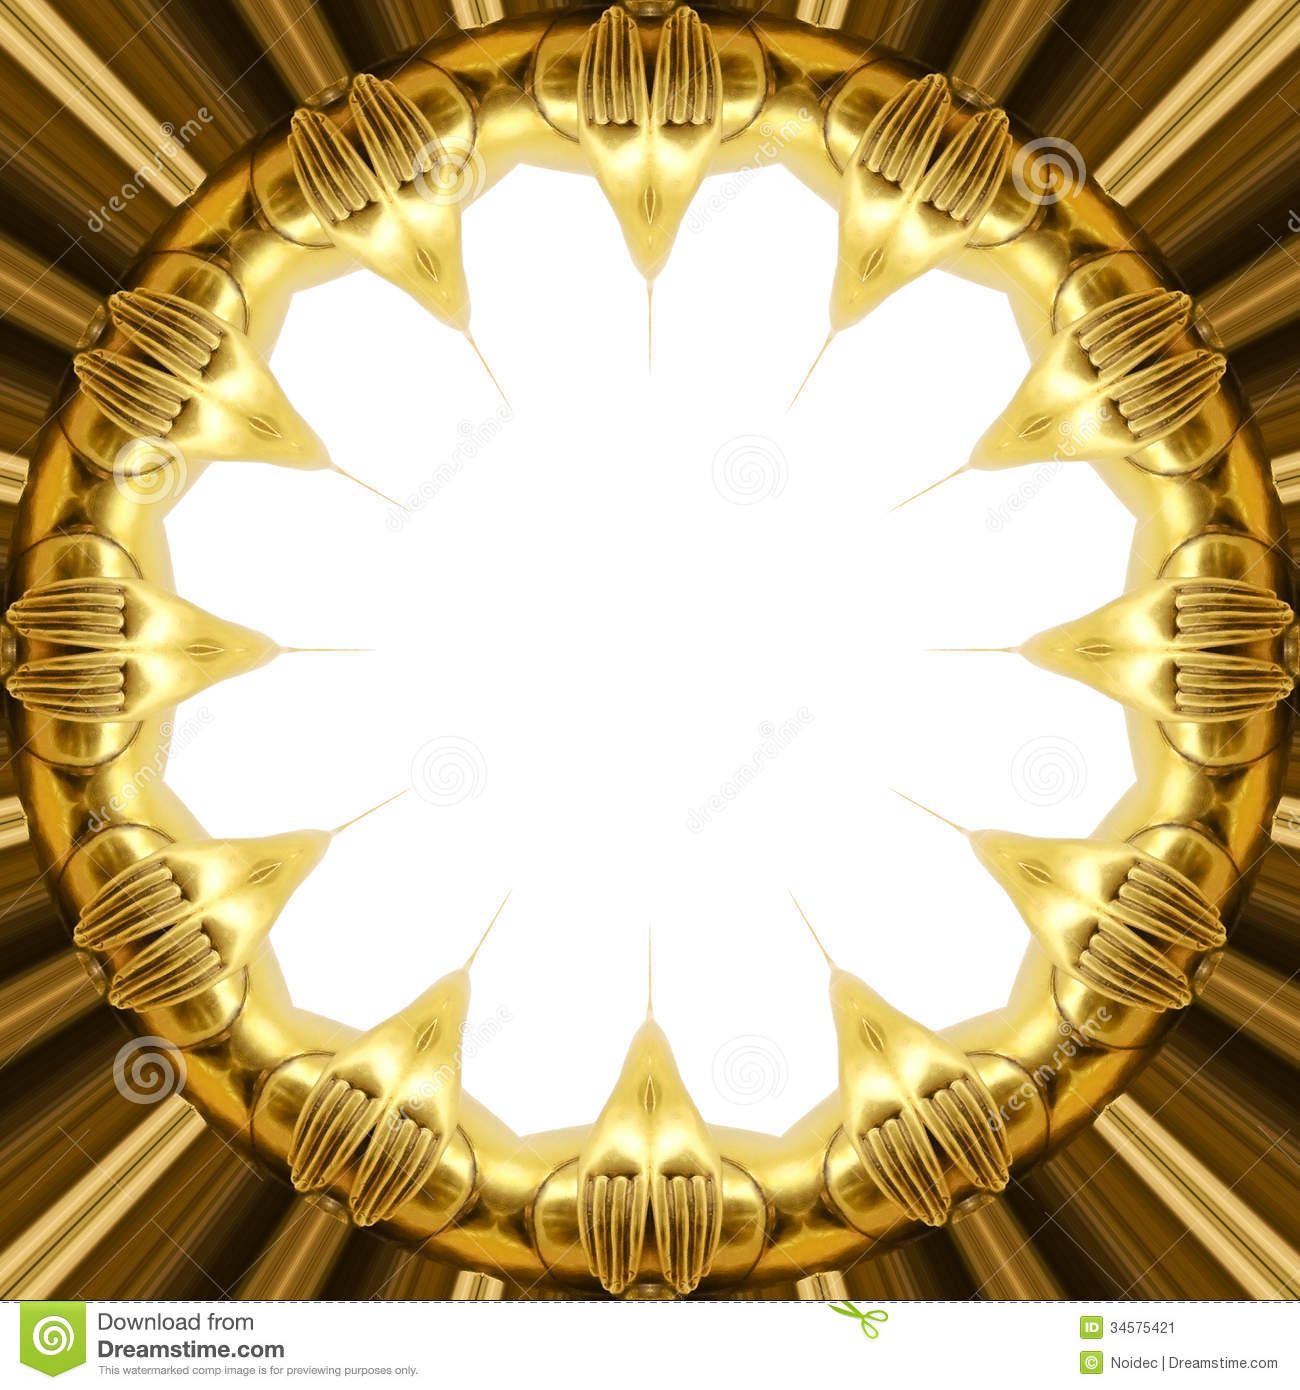 Oriental Gold Ornament Texture Stock Image